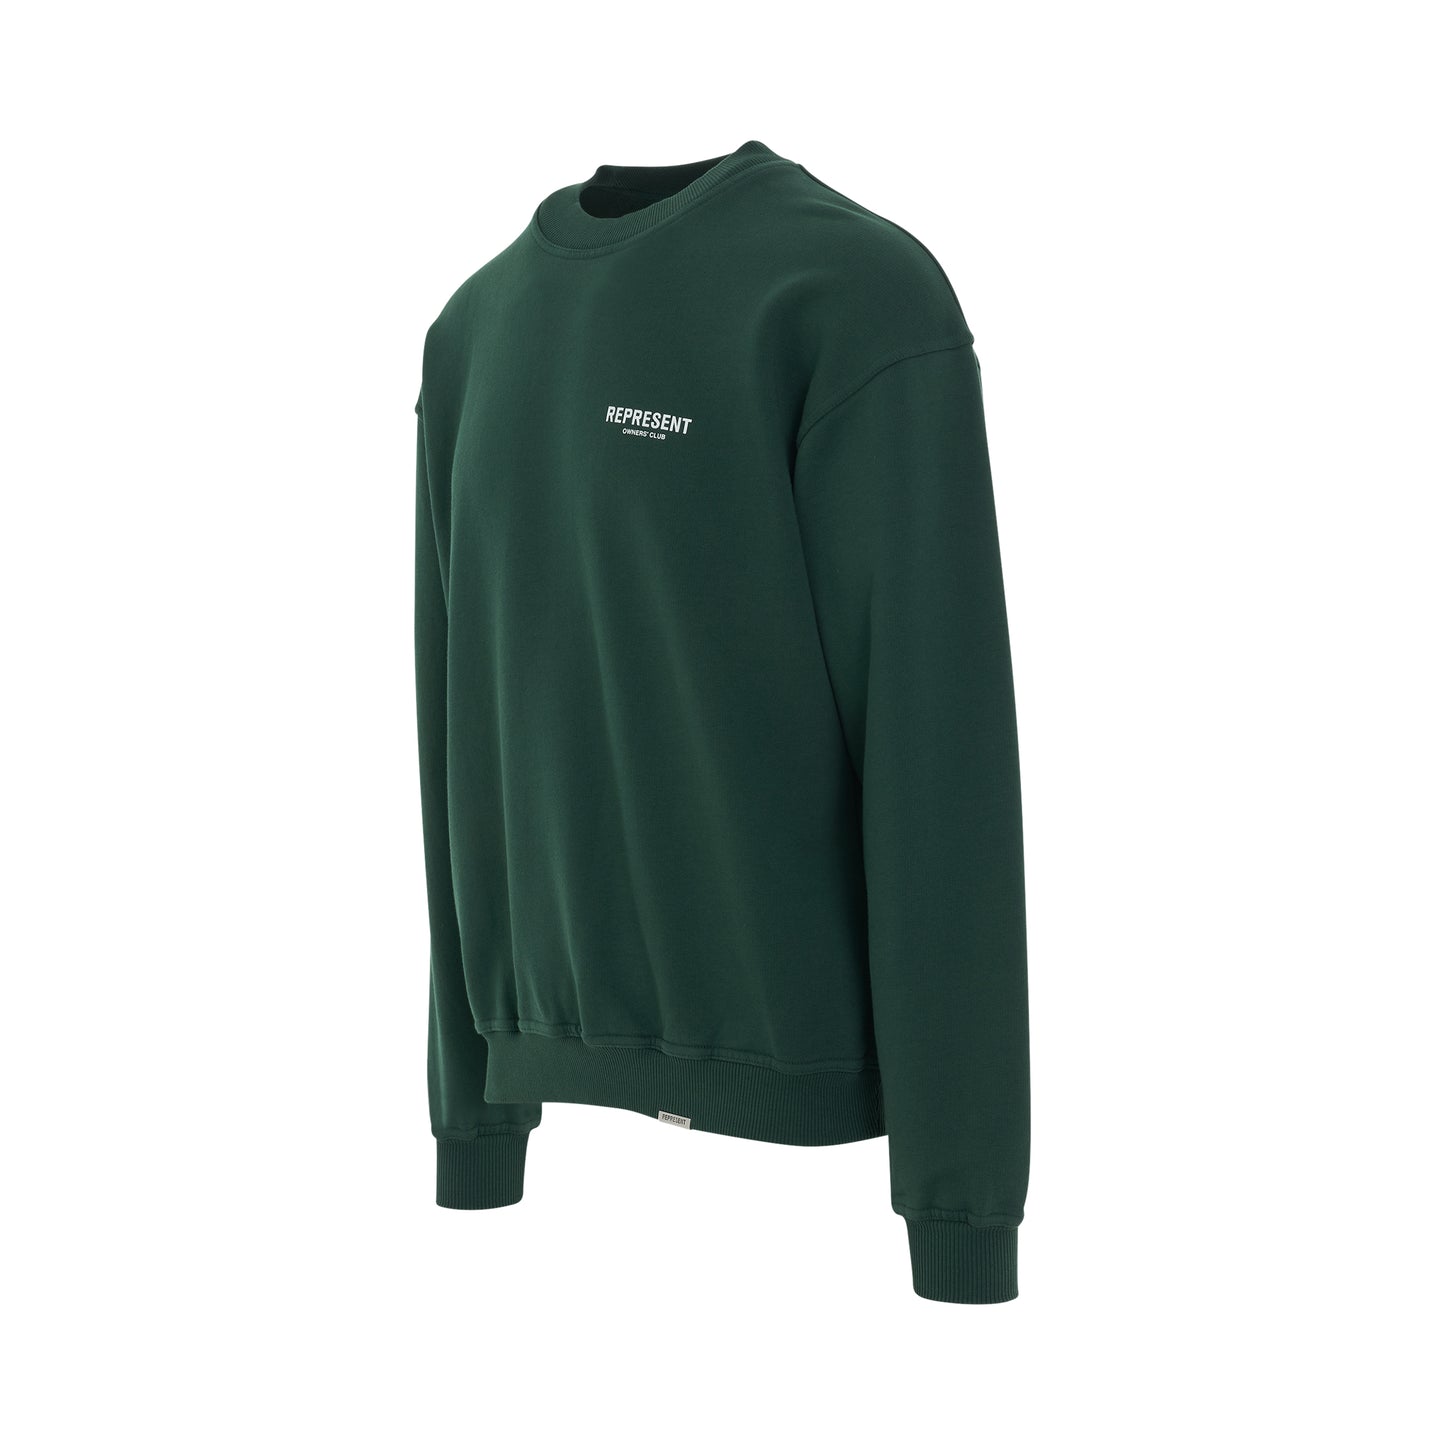 Represent Owners Club Sweater in Racing Green